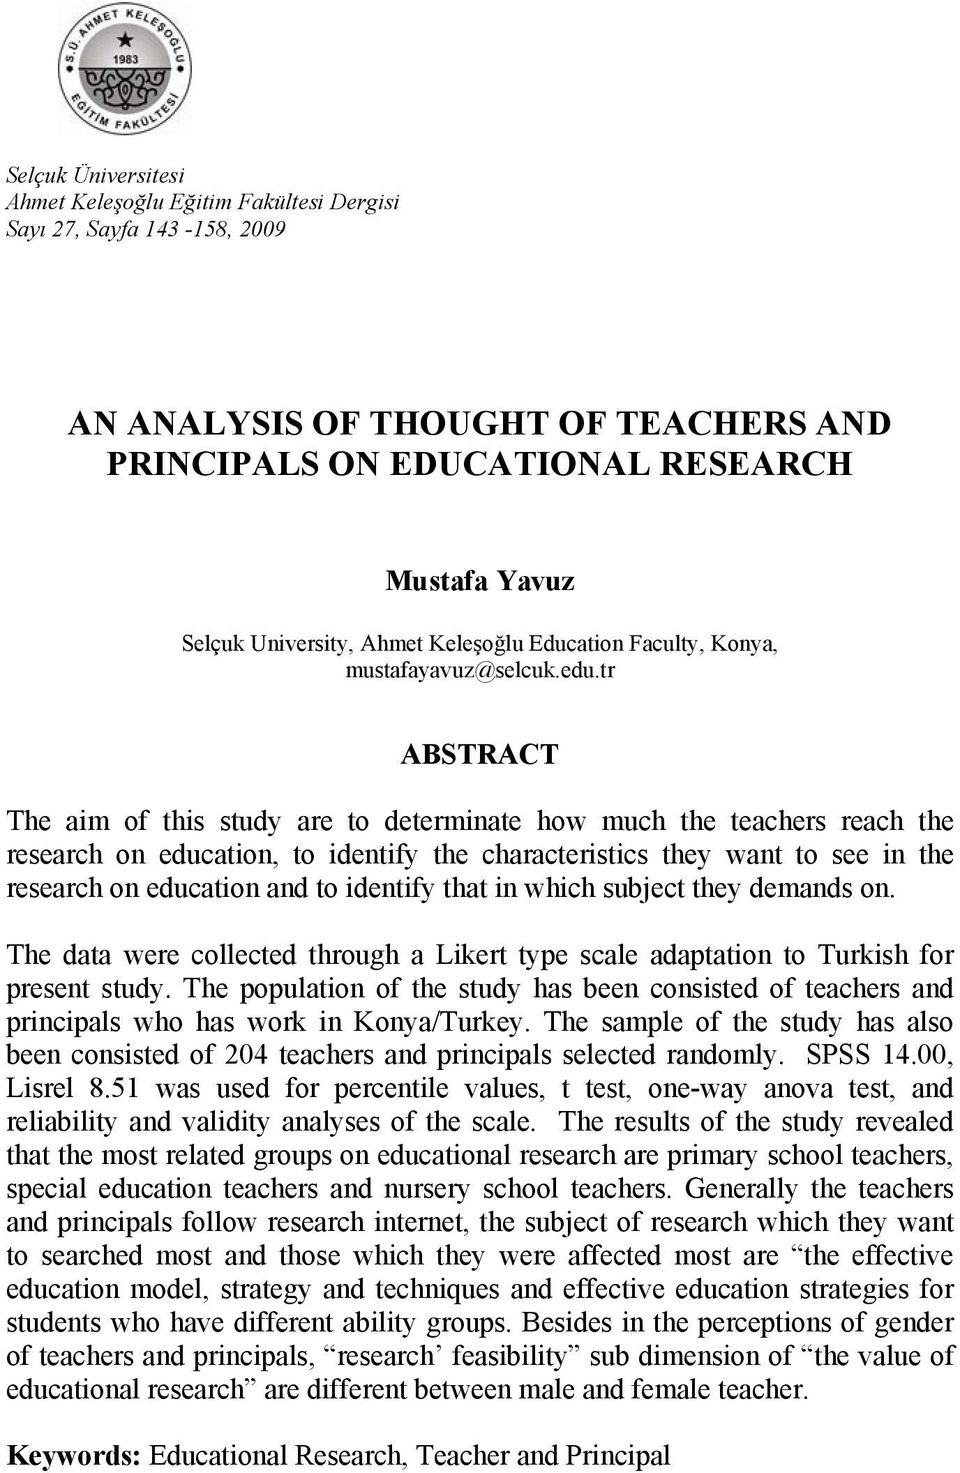 tr ABSTRACT The aim of this study are to determinate how much the teachers reach the research on education, to identify the characteristics they want to see in the research on education and to